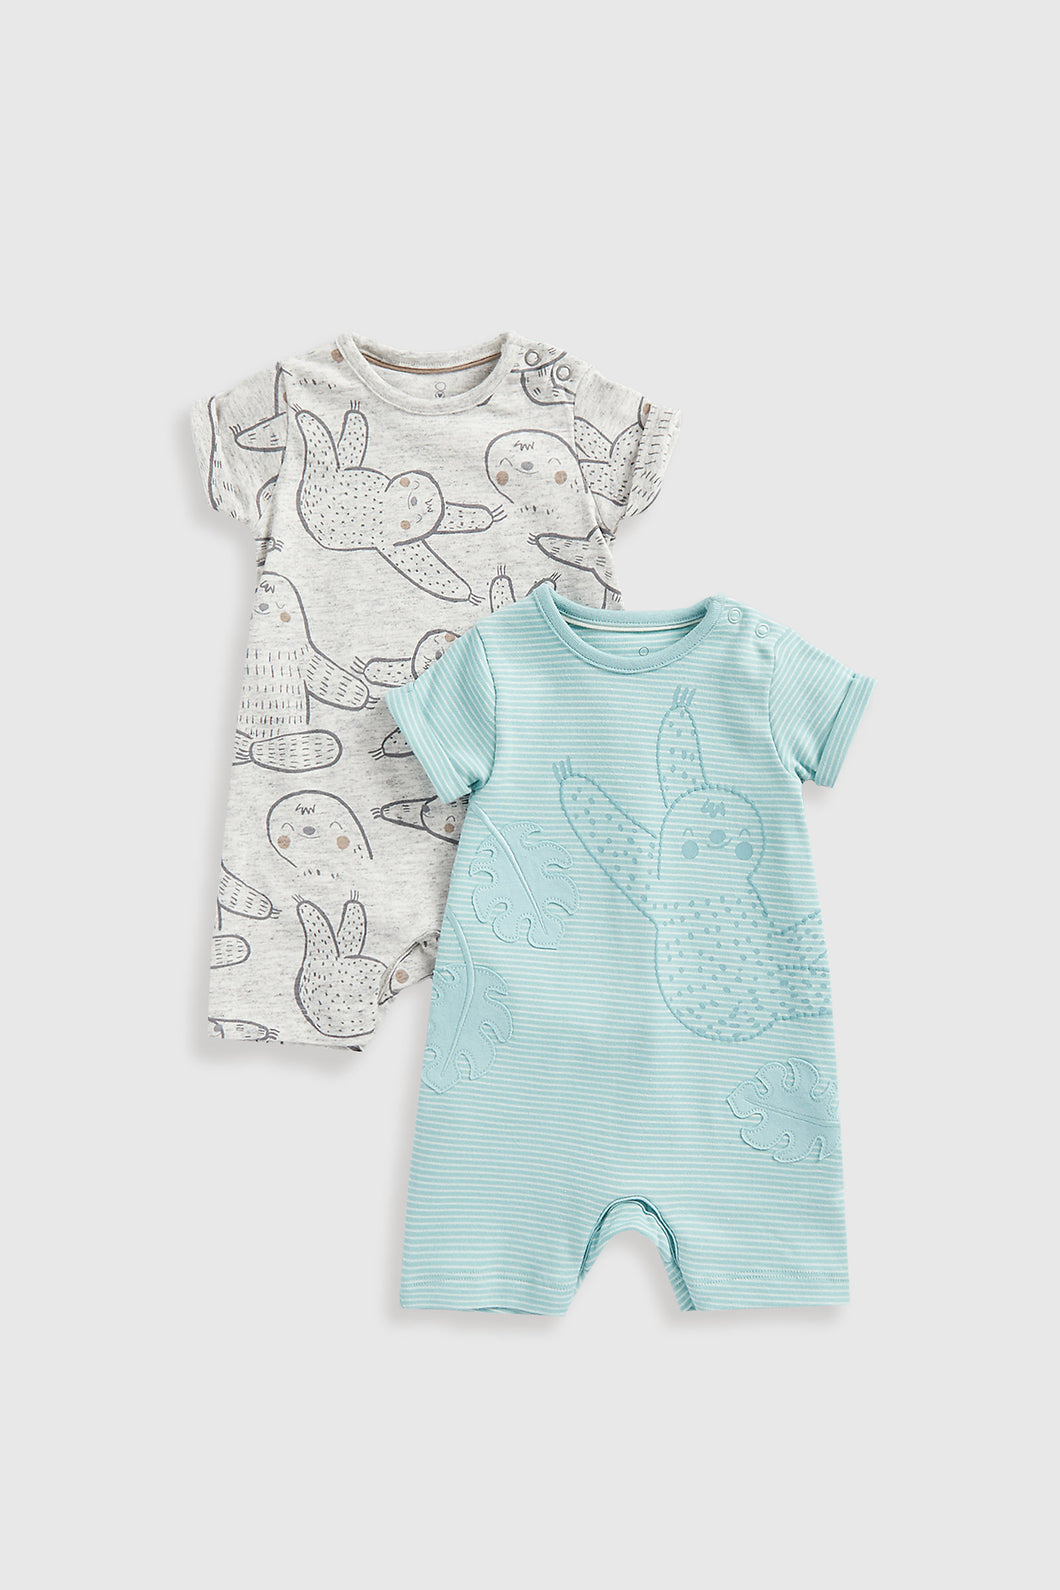 Mothercare Yoga Sloth Rompers - 2 Pack